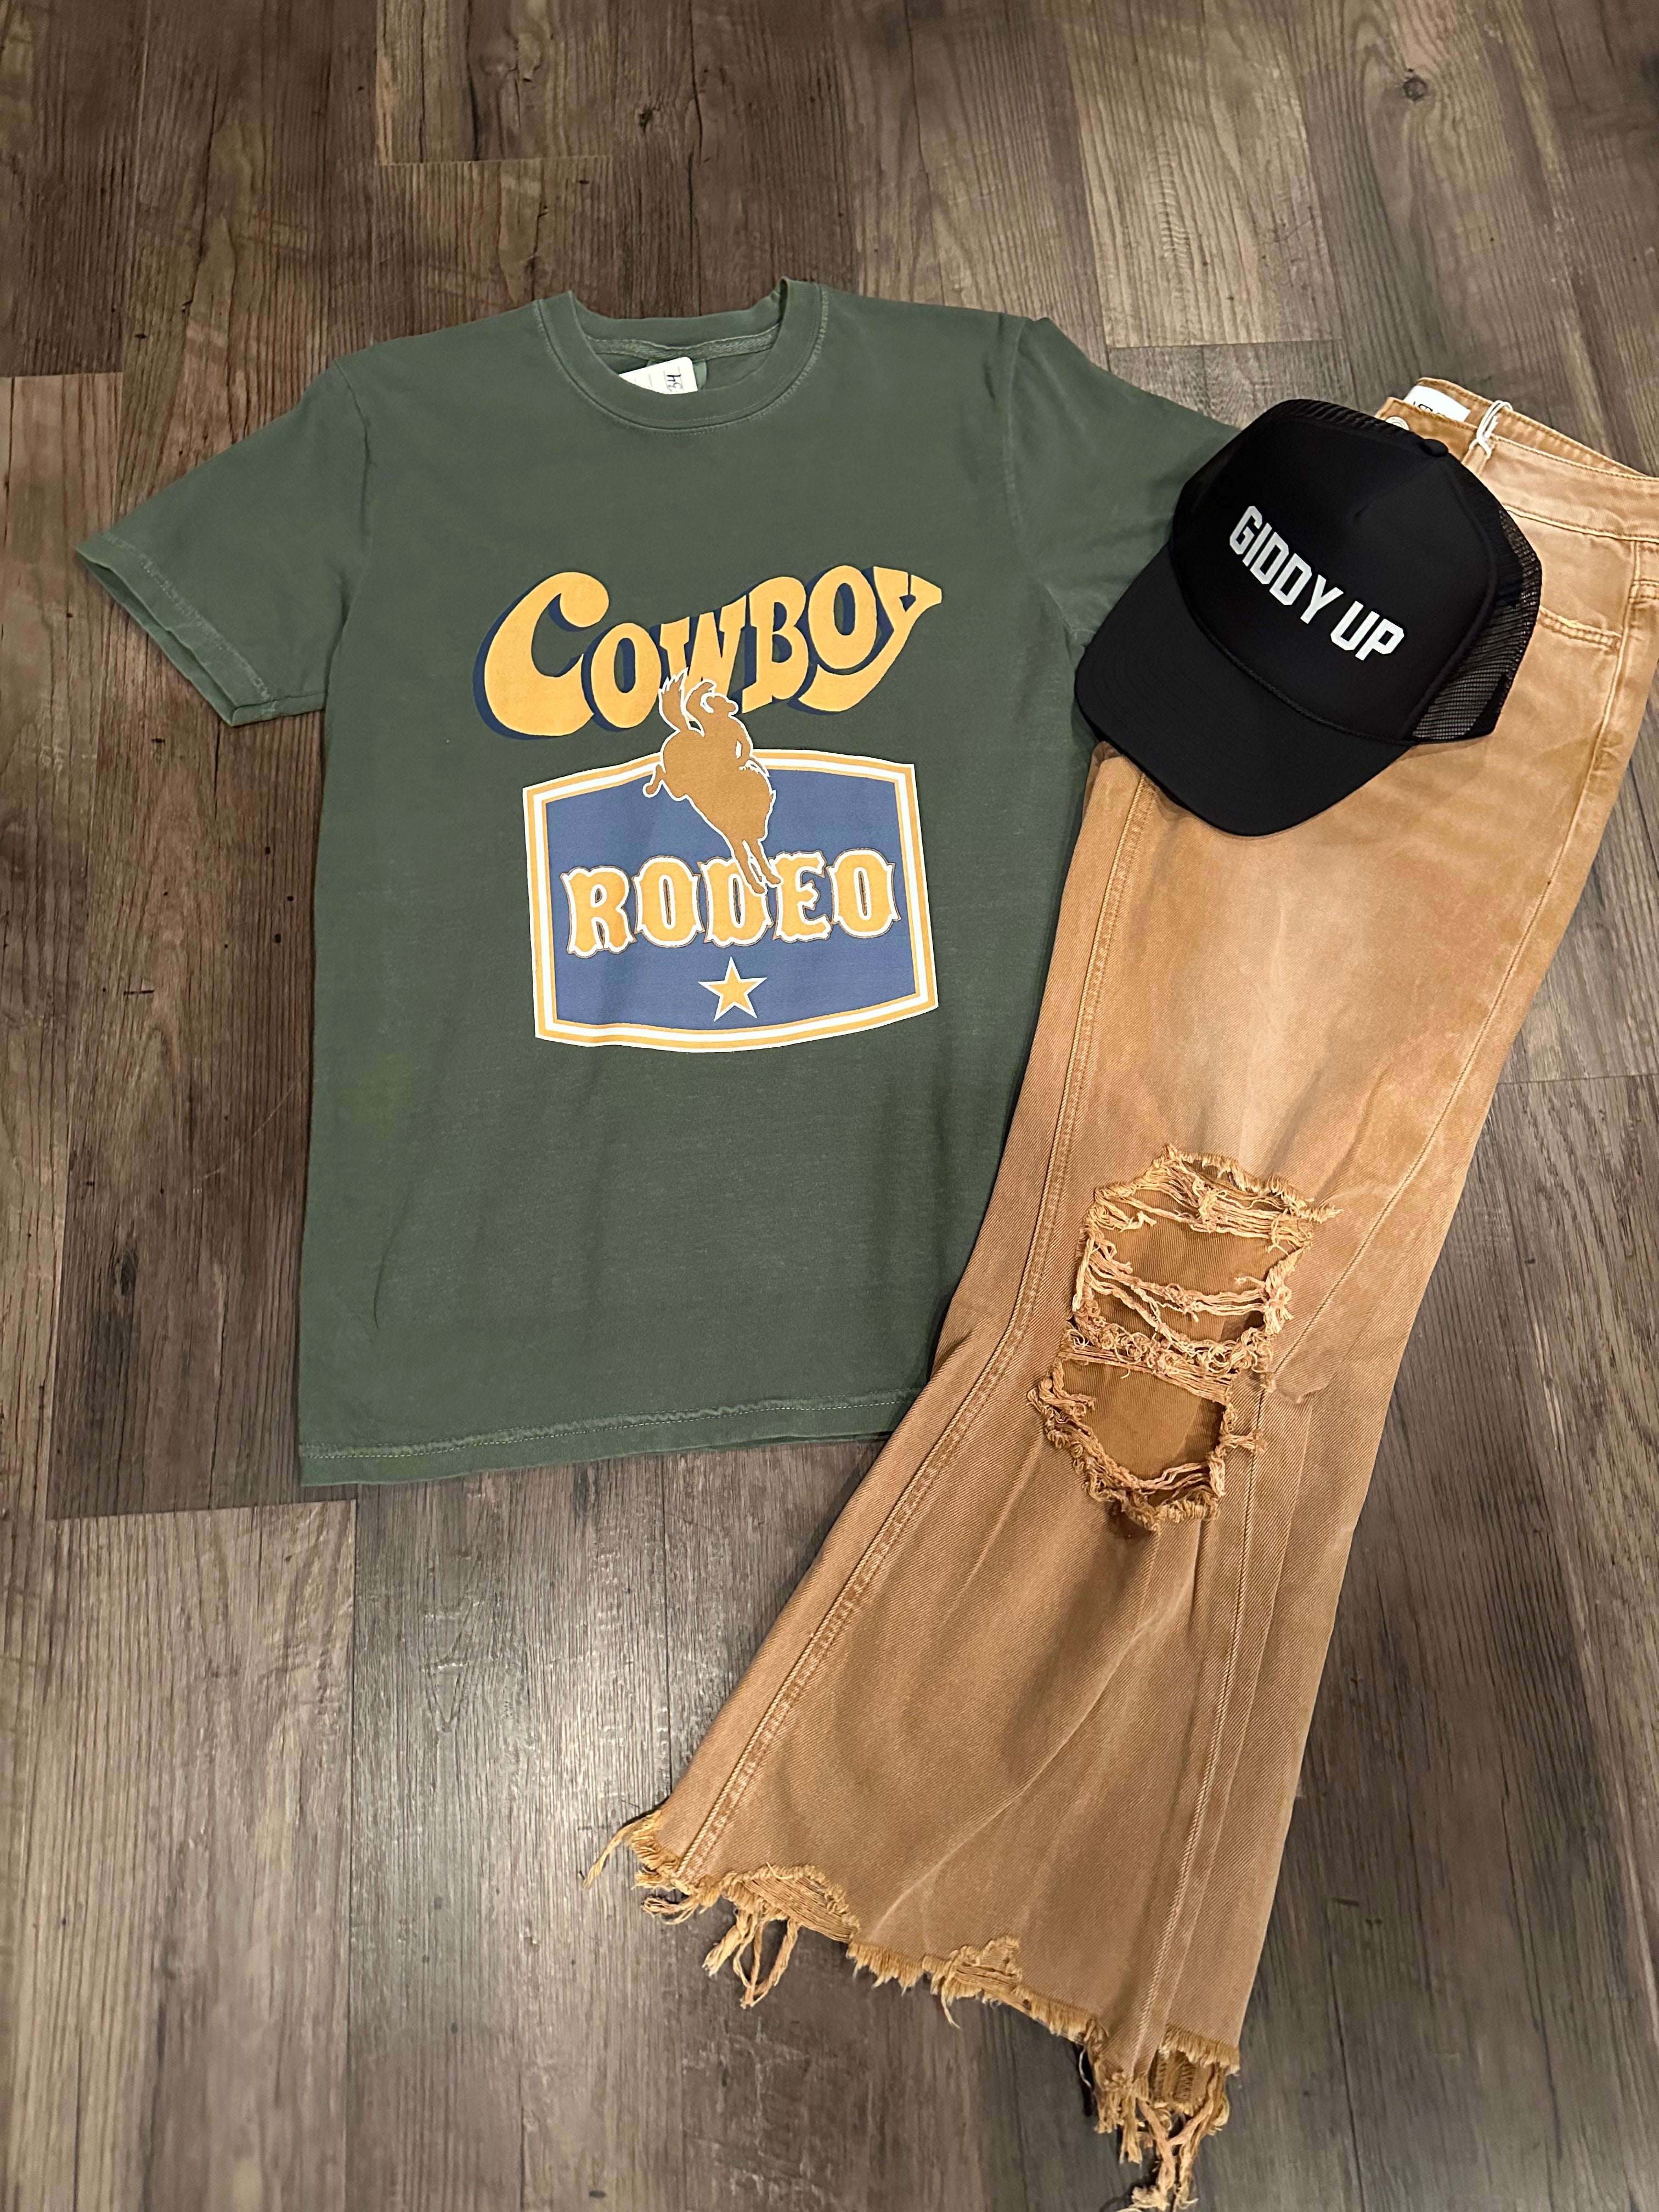 Cowboy Rodeo Graphic Tee